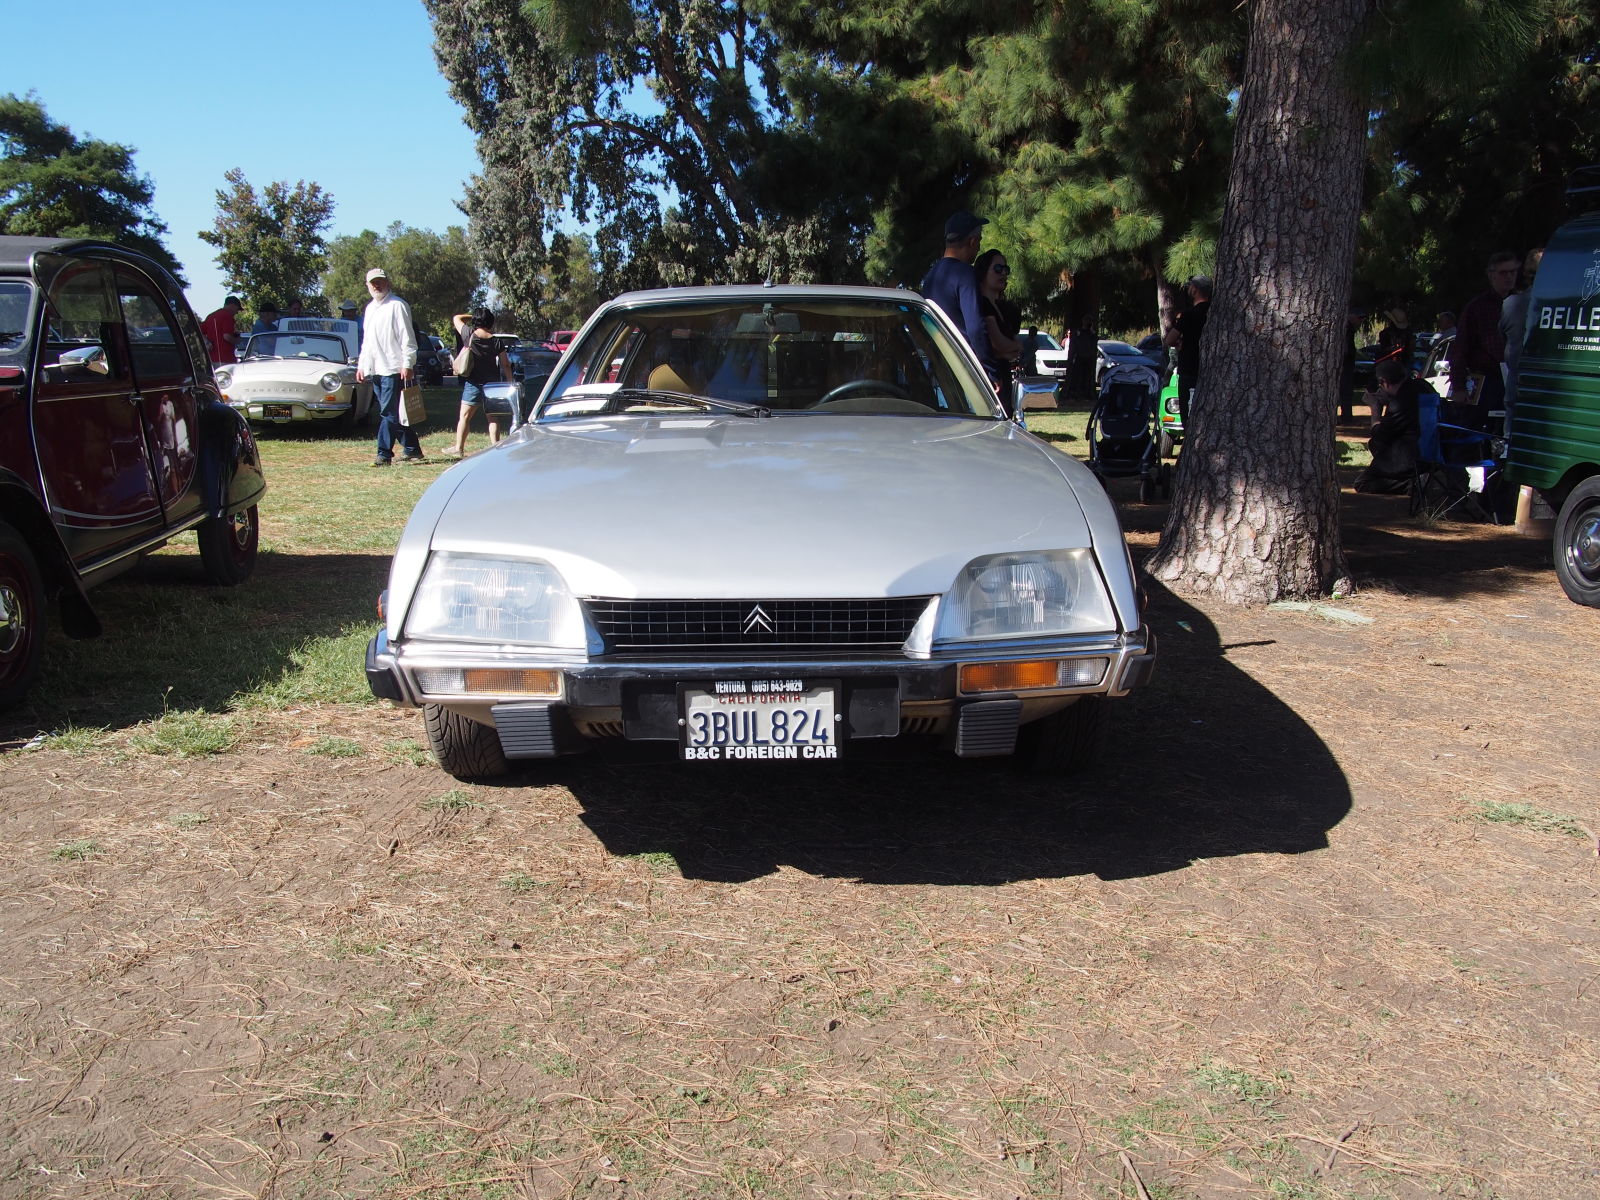 Always cool to see a Citroën CX in America.